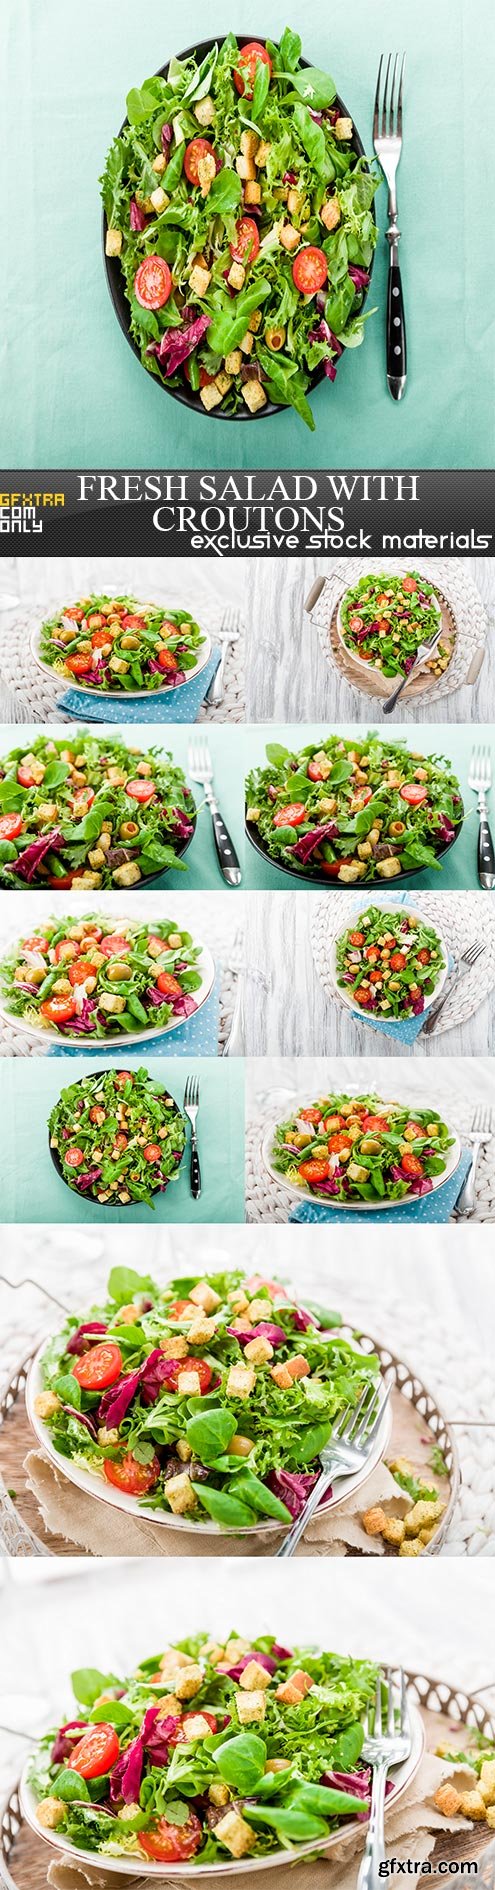 Fresh salad with croutons, tomatoes and olives,10 x UHQ JPEG